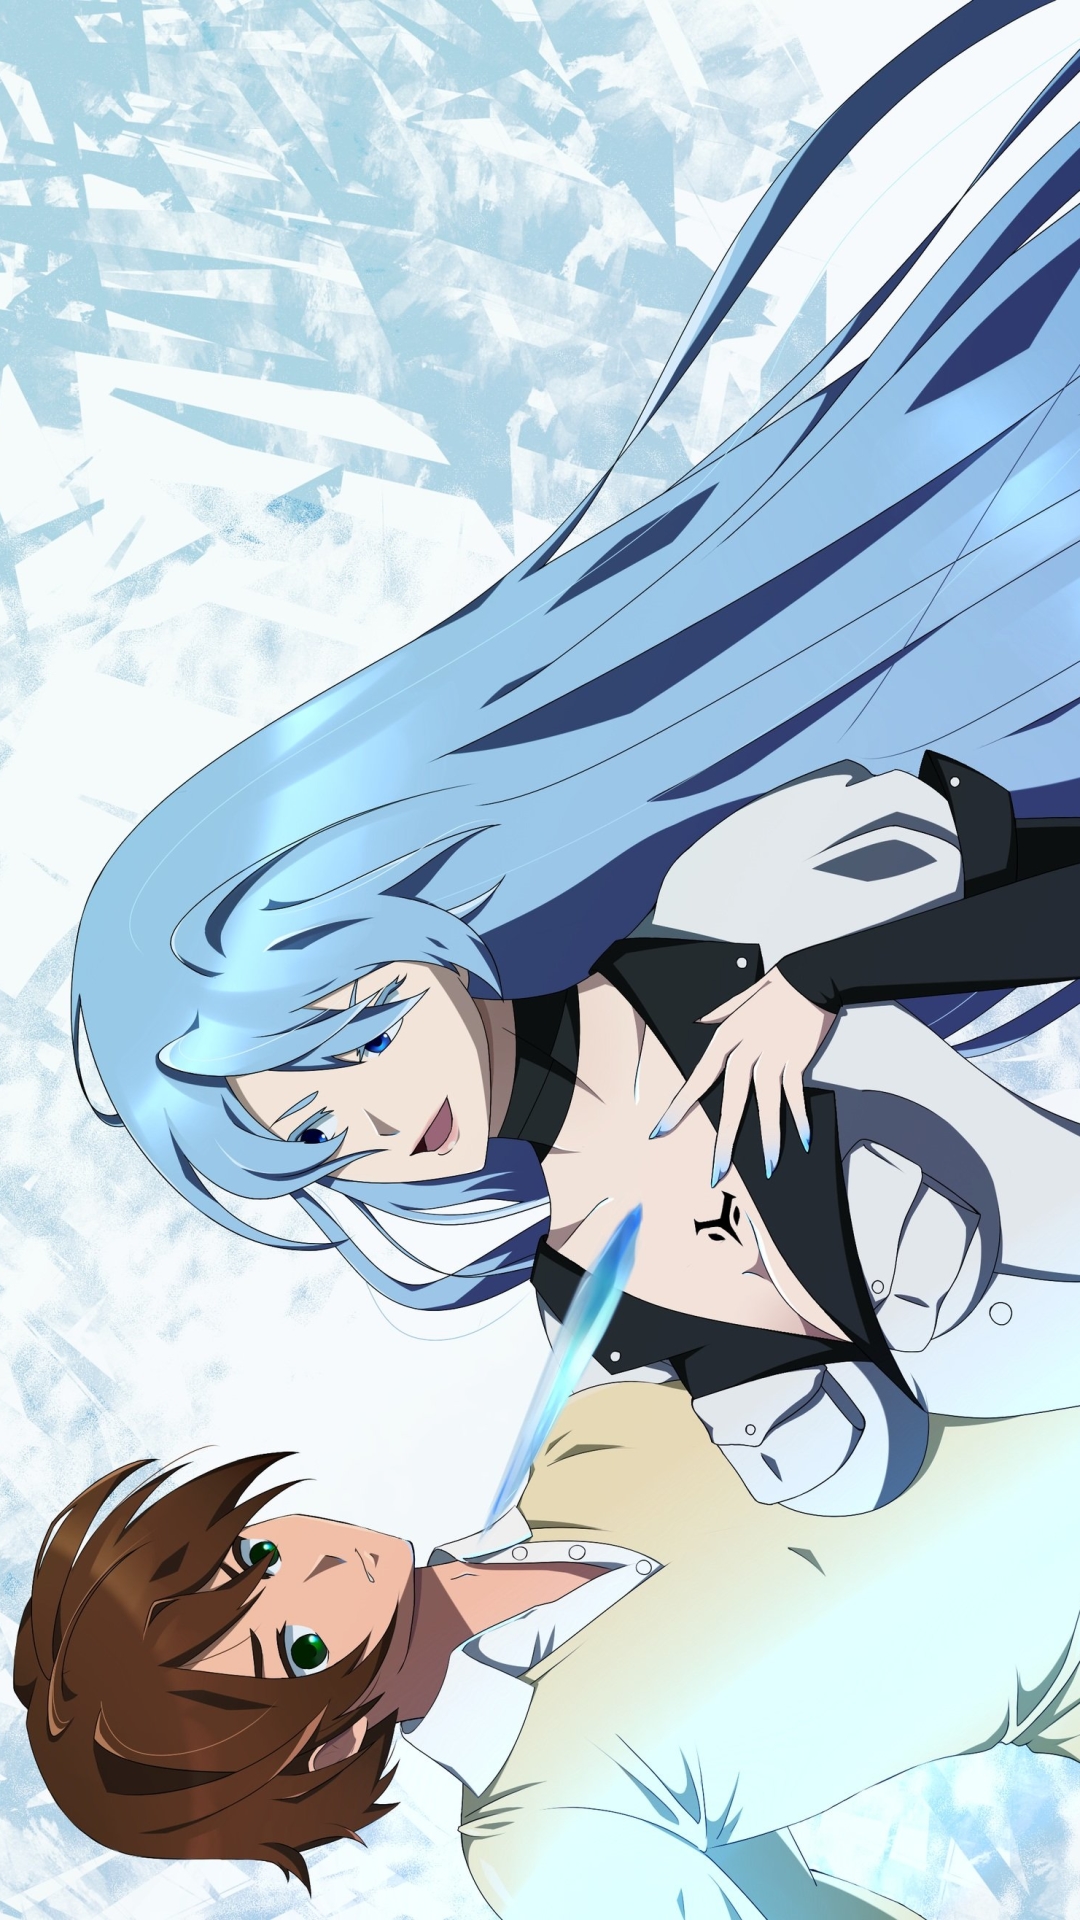 Esdeath and